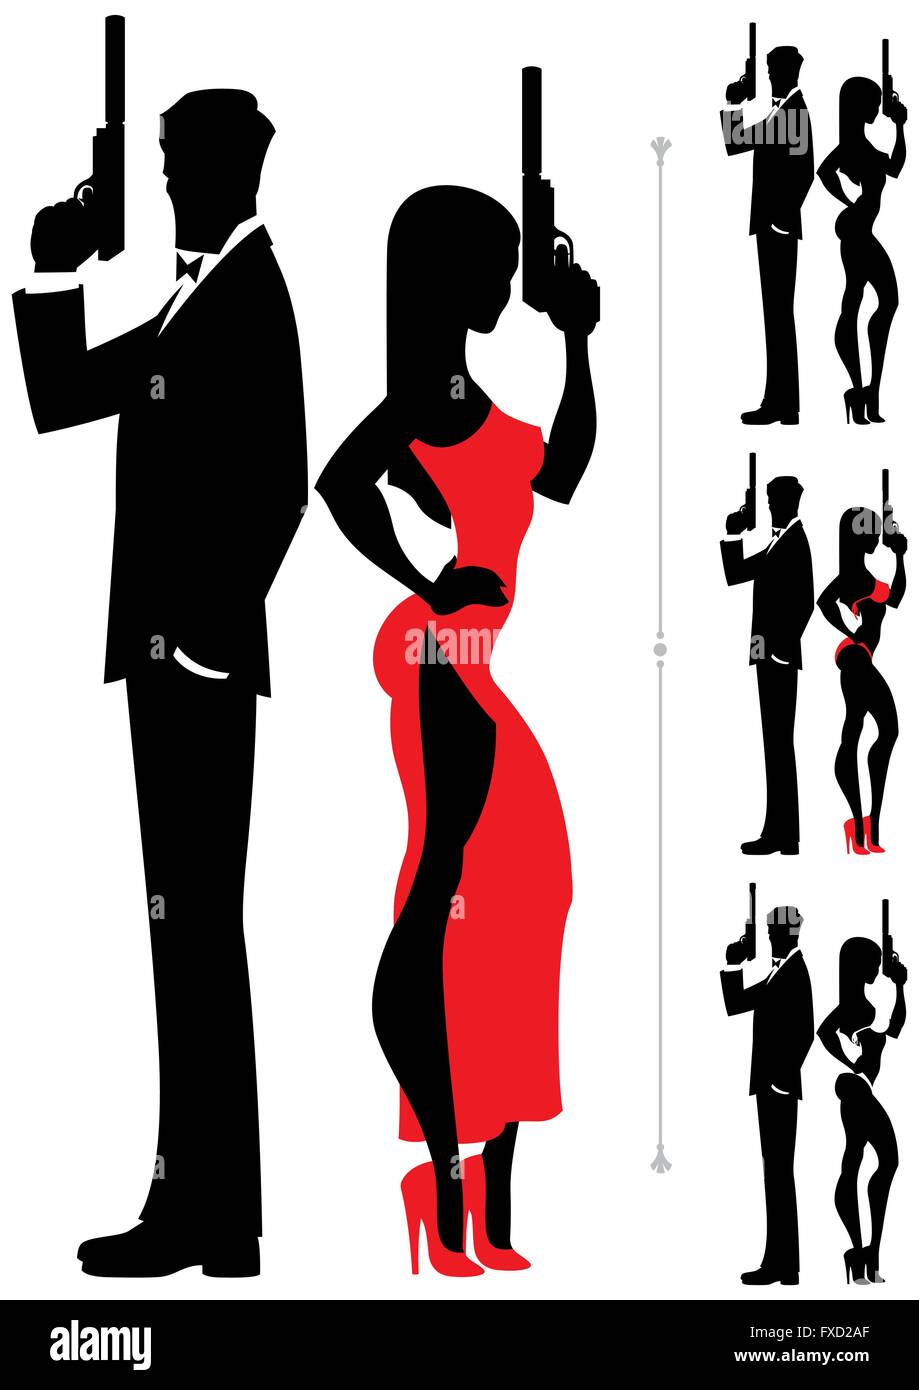 Silhouettes of spy couple over white background. Four versions differing by the outfit of the female. Stock Vector